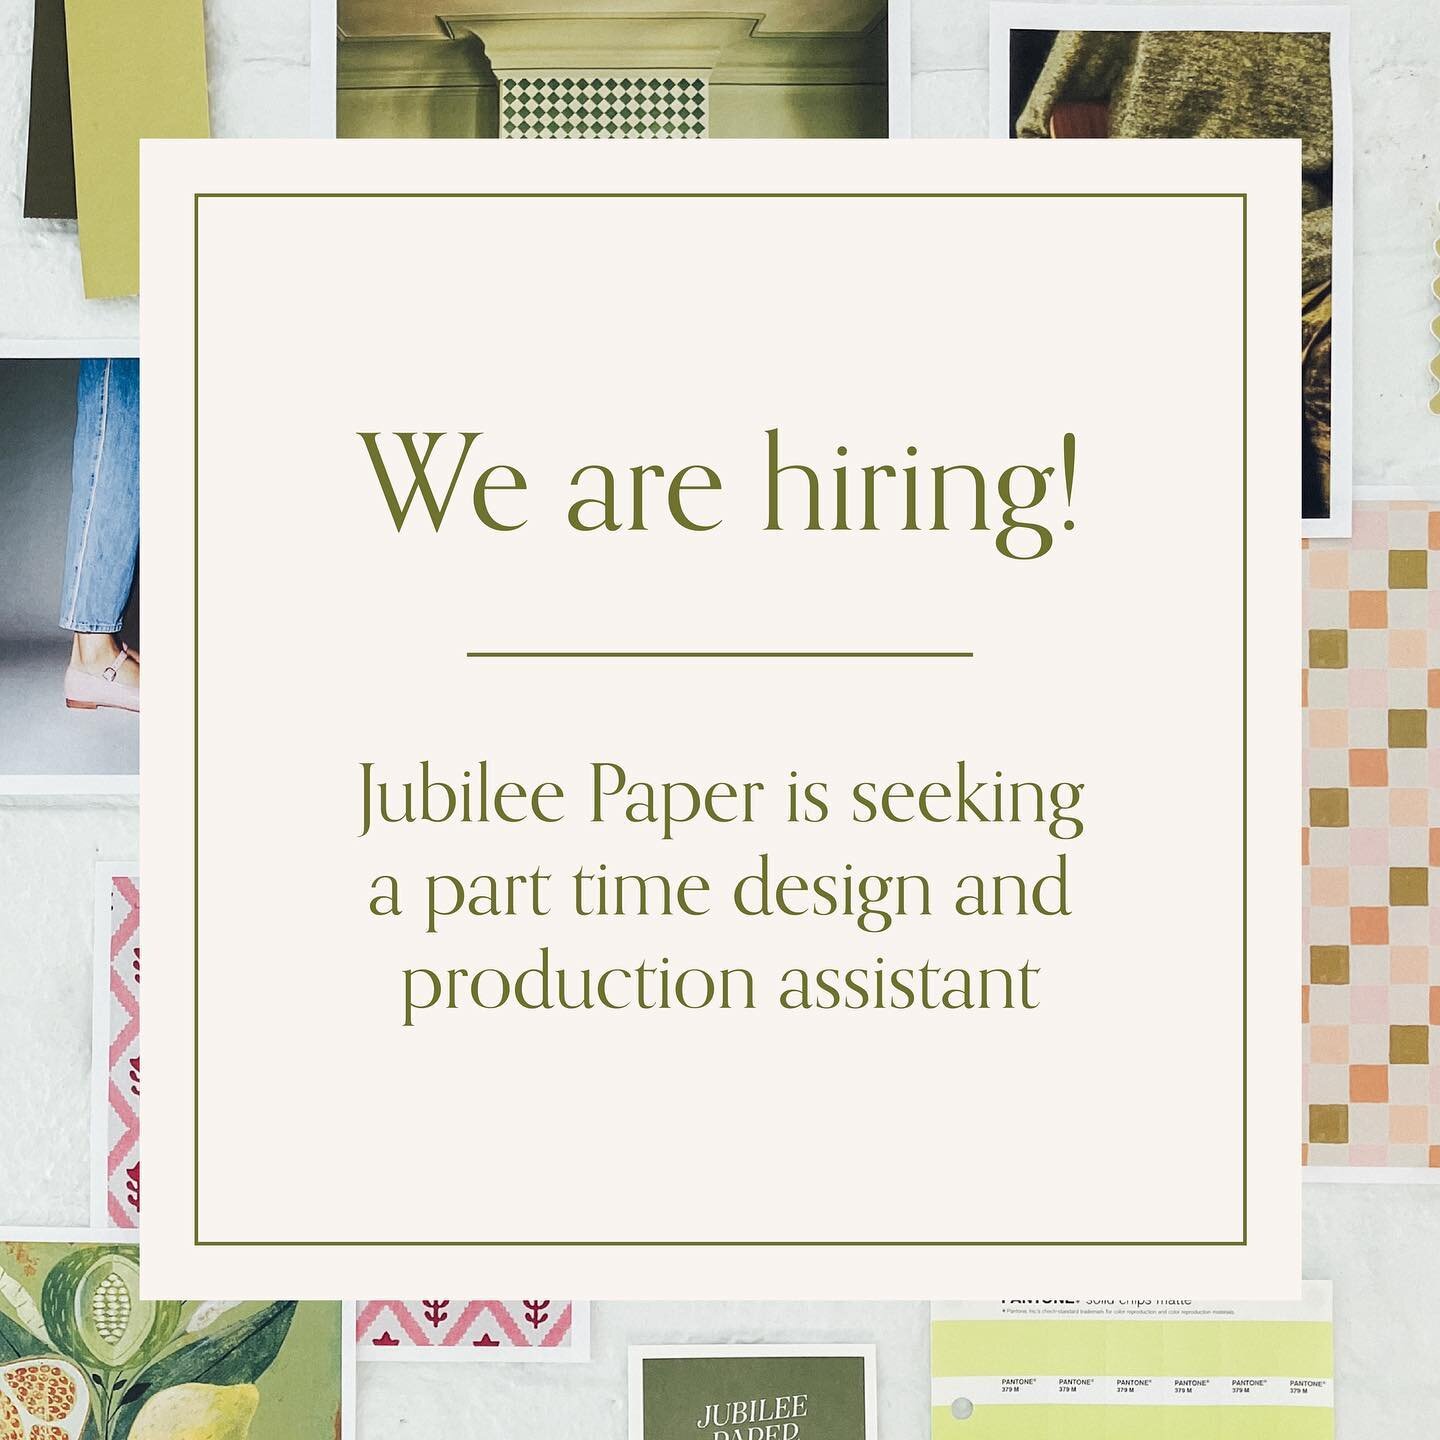 Exciting news&mdash;Jubilee Paper is hiring! We&rsquo;re looking for a part time design and production assistant to help with design updates, print production, invitation assembly, and social media content creation. Tag anyone who you think would be 